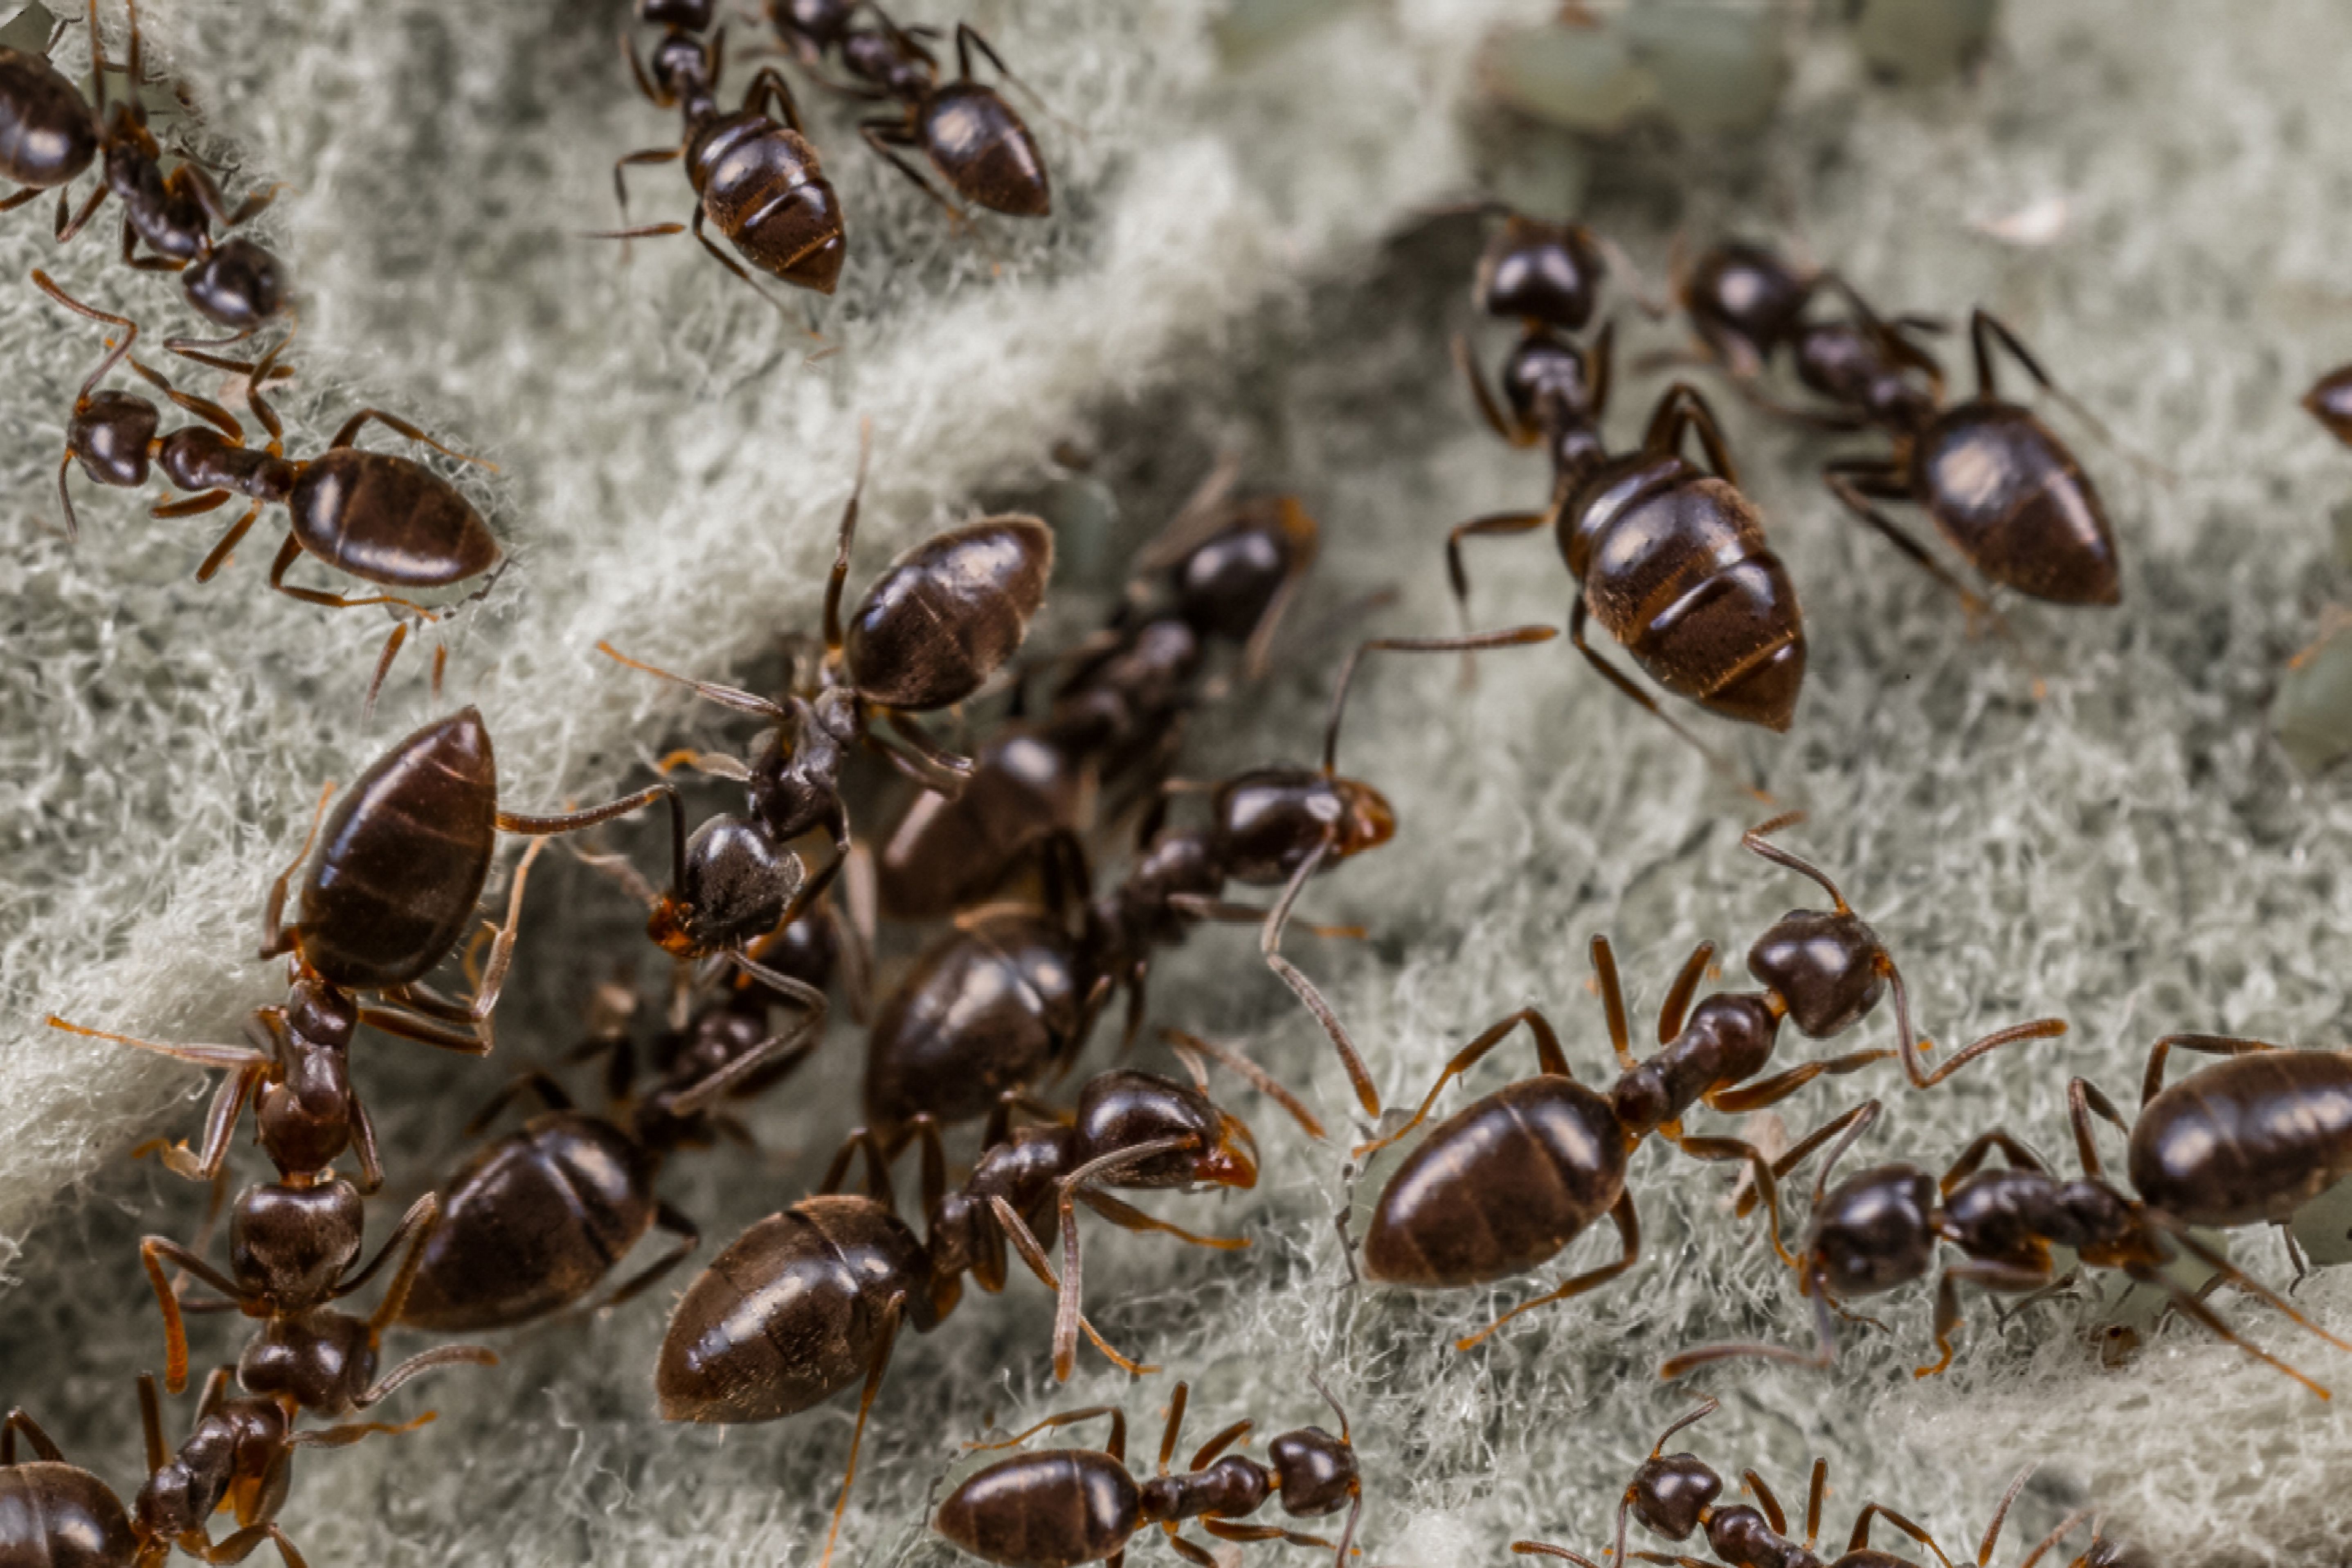 How to Get Rid of Ants in Your Home This Fall